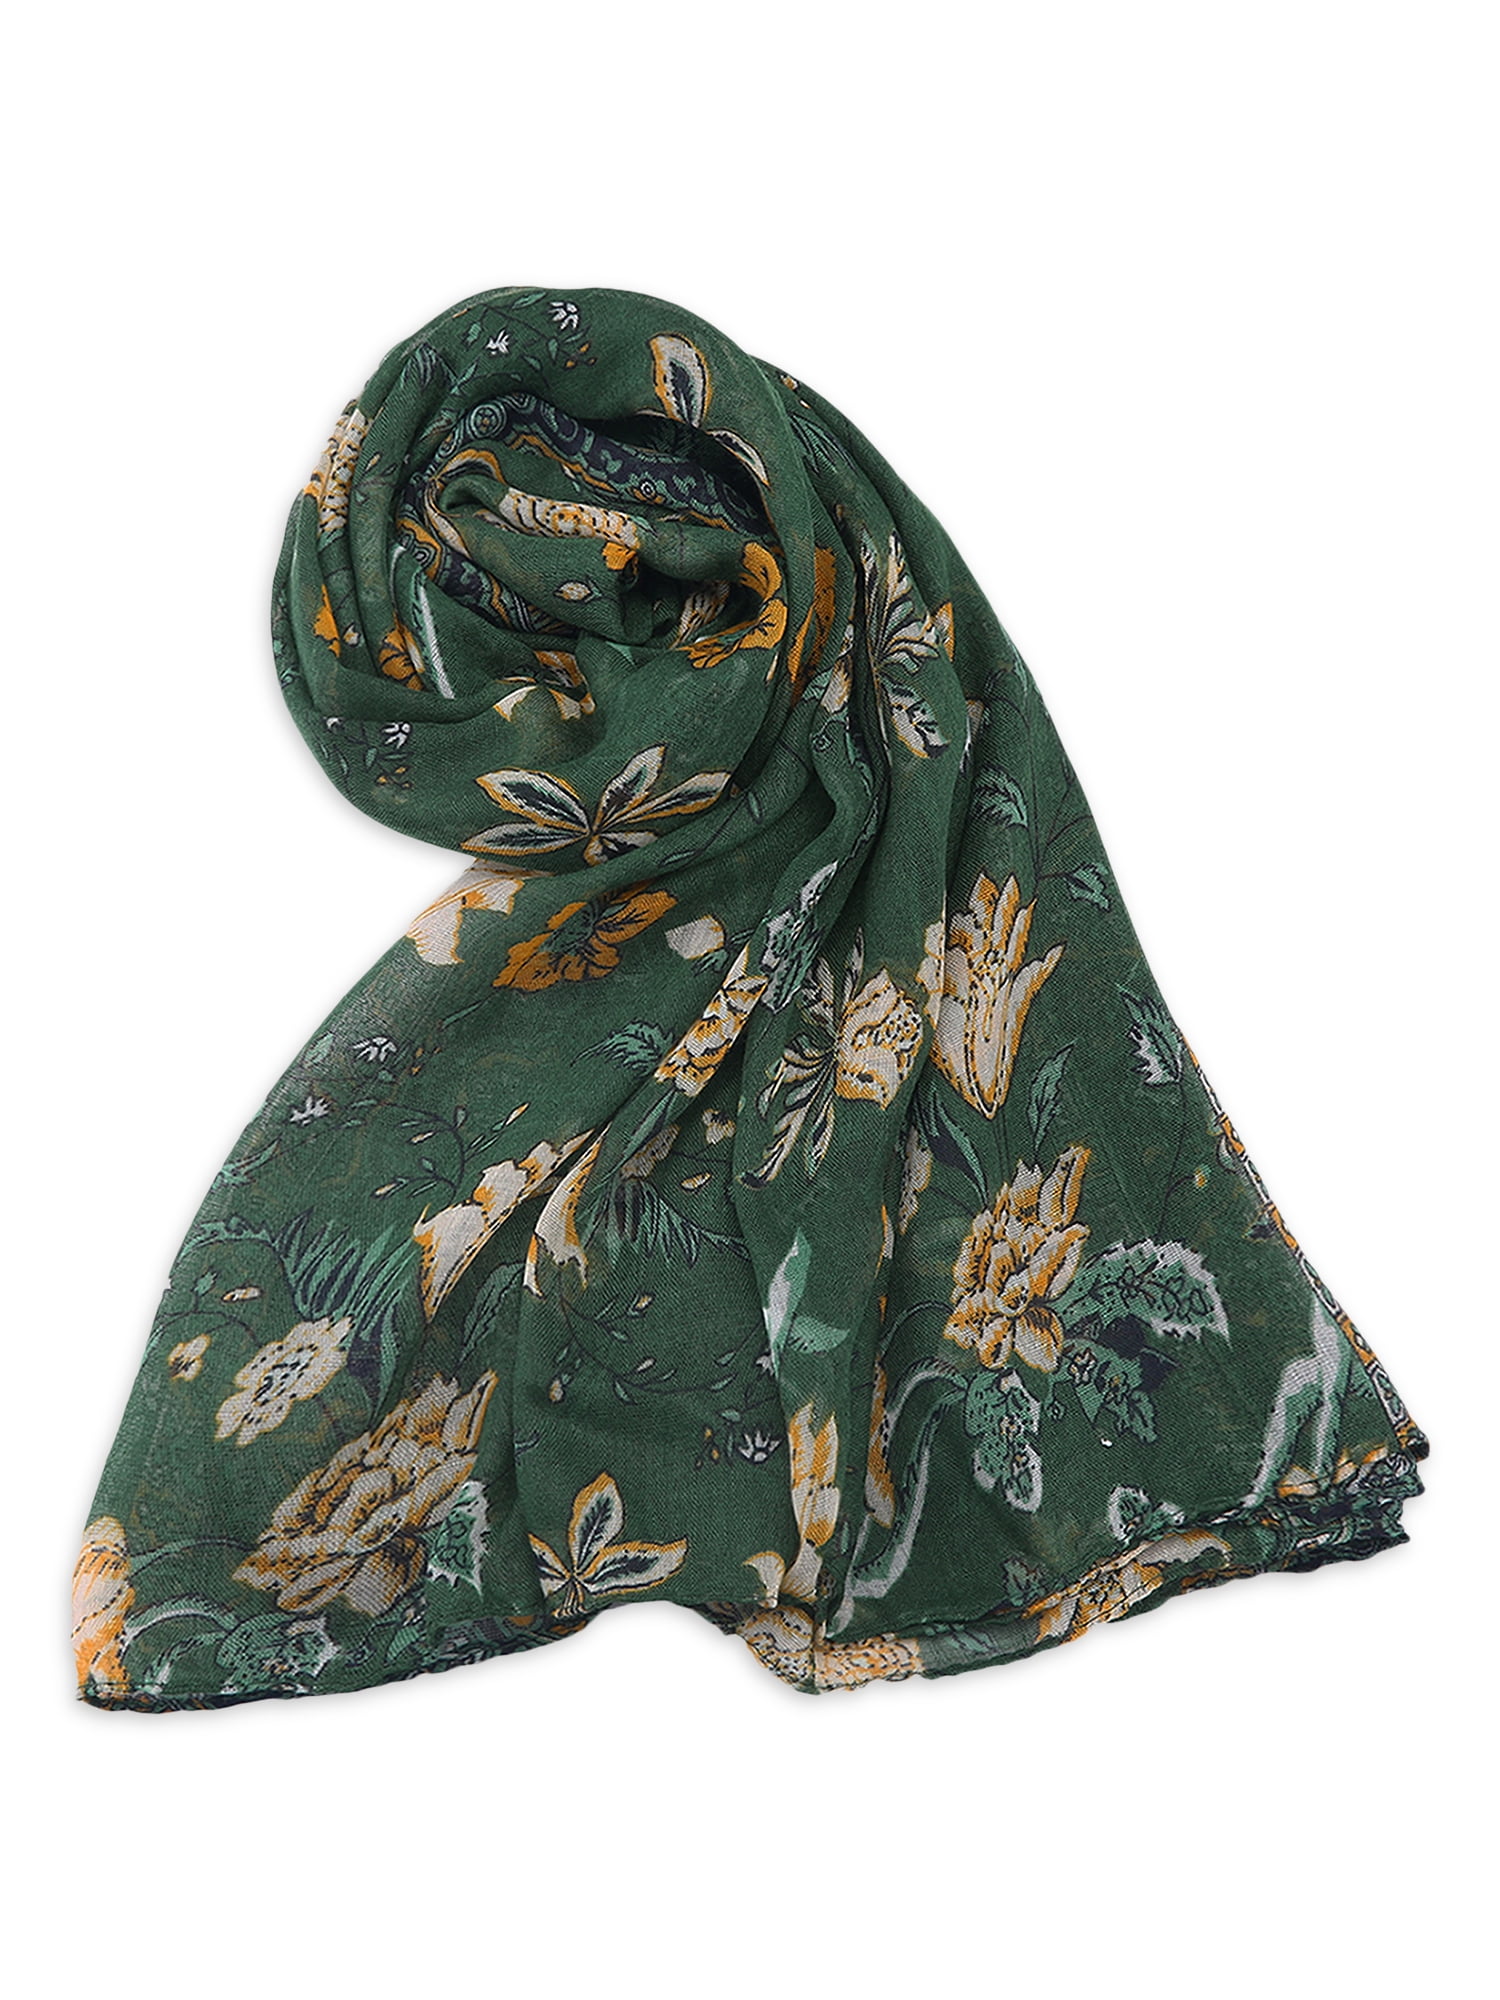 Boho Scarves for Women Sarong Beach Wrap Organic Cotton floral scarf Indian Hand Block Print Scarf Neck Warmer Scarf